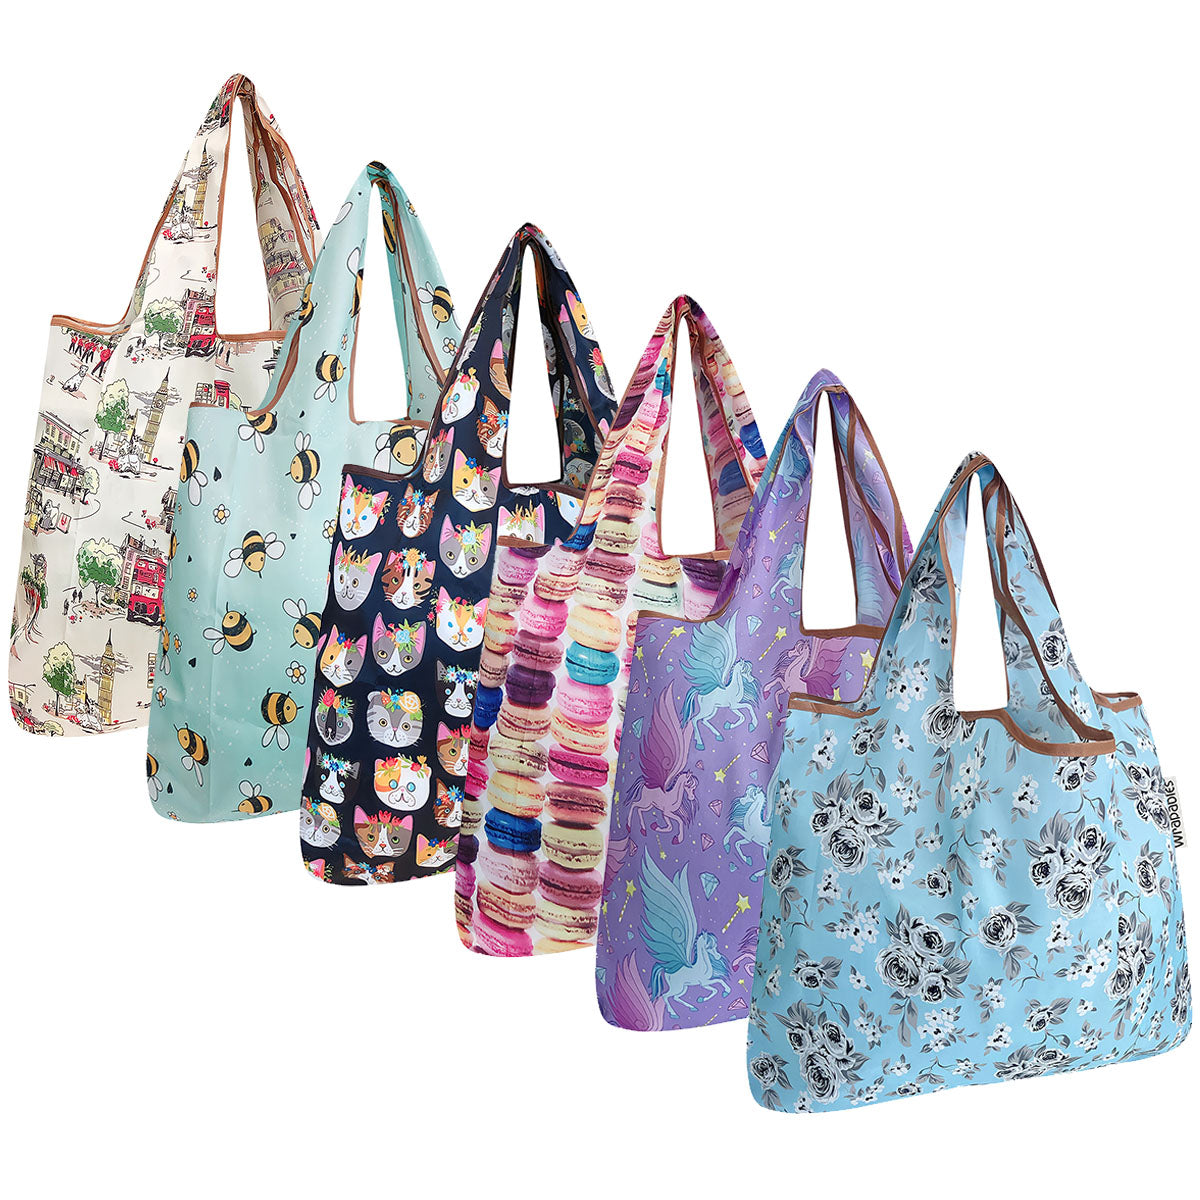 Wrapables Small Foldable Tote Nylon Reusable Grocery Bags (Set of 6)